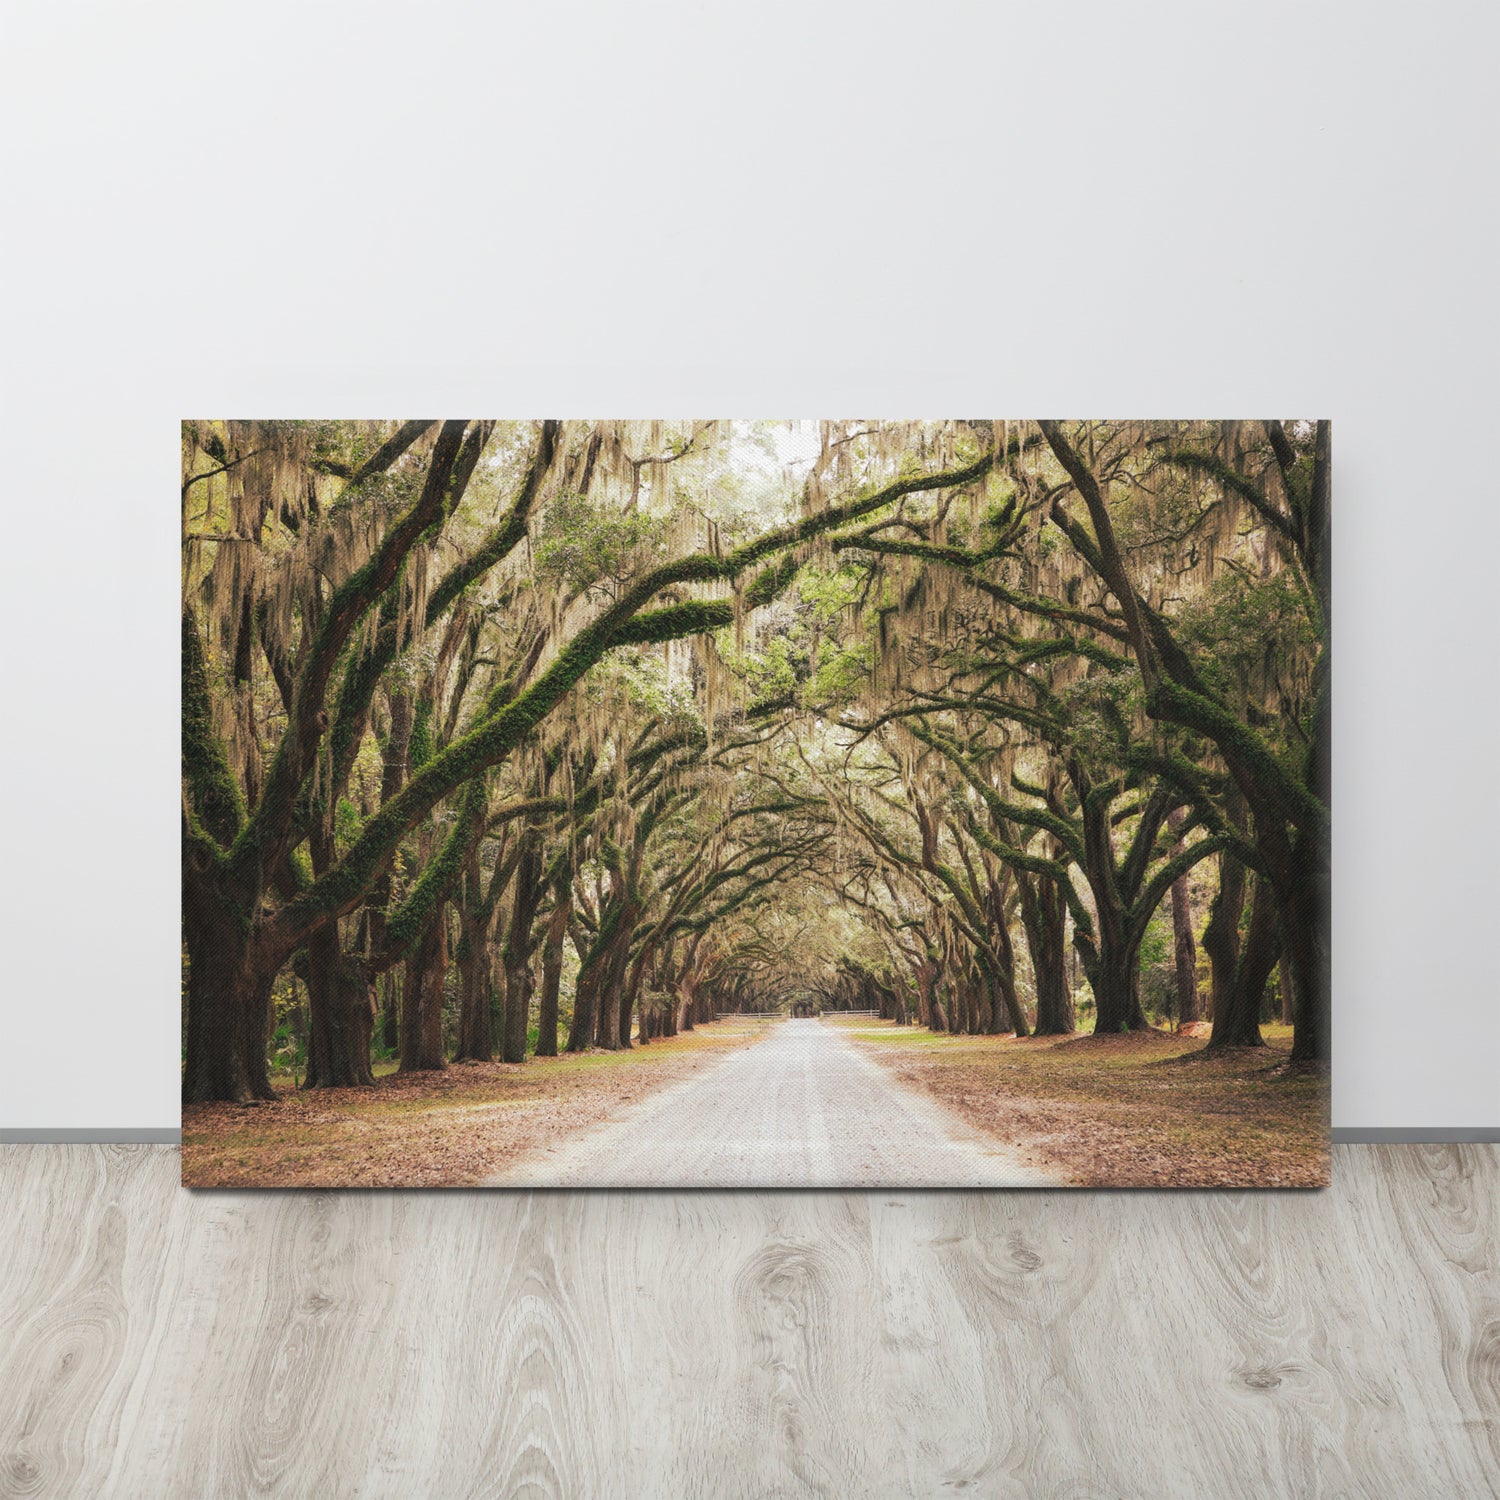 Versatility: High-quality canvas prints complement various decor styles. They look fantastic unframed for a modern gallery feel or can be finished in a frame for a more classic appearance.